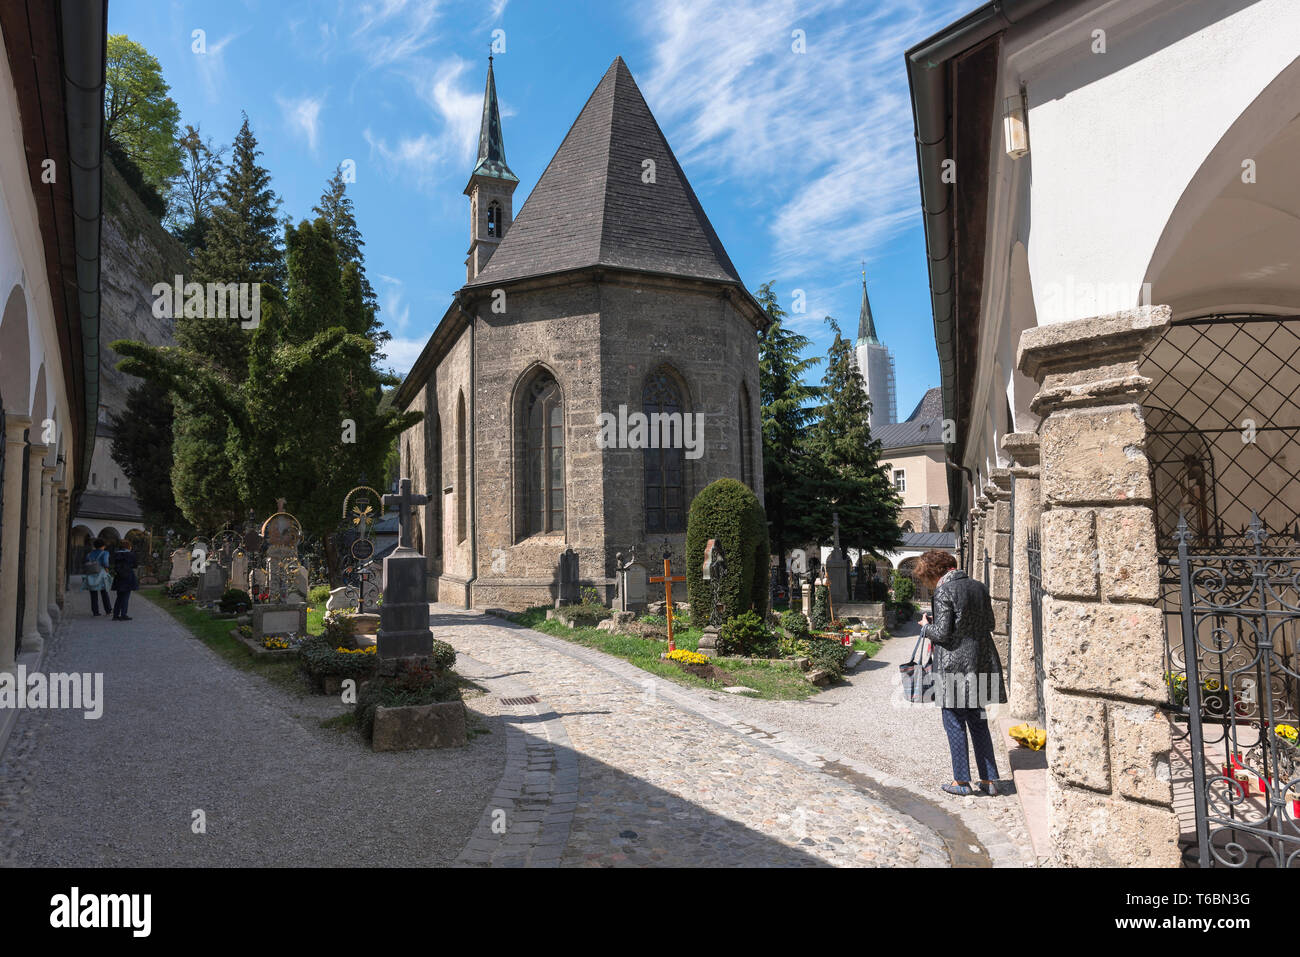 Salzburg cemetery, view of the Petersfriedhof Cemetery and rear of the Margarethenkapelle in the Old Town (Altstadt) quarter of Salzburg, Austria. Stock Photo